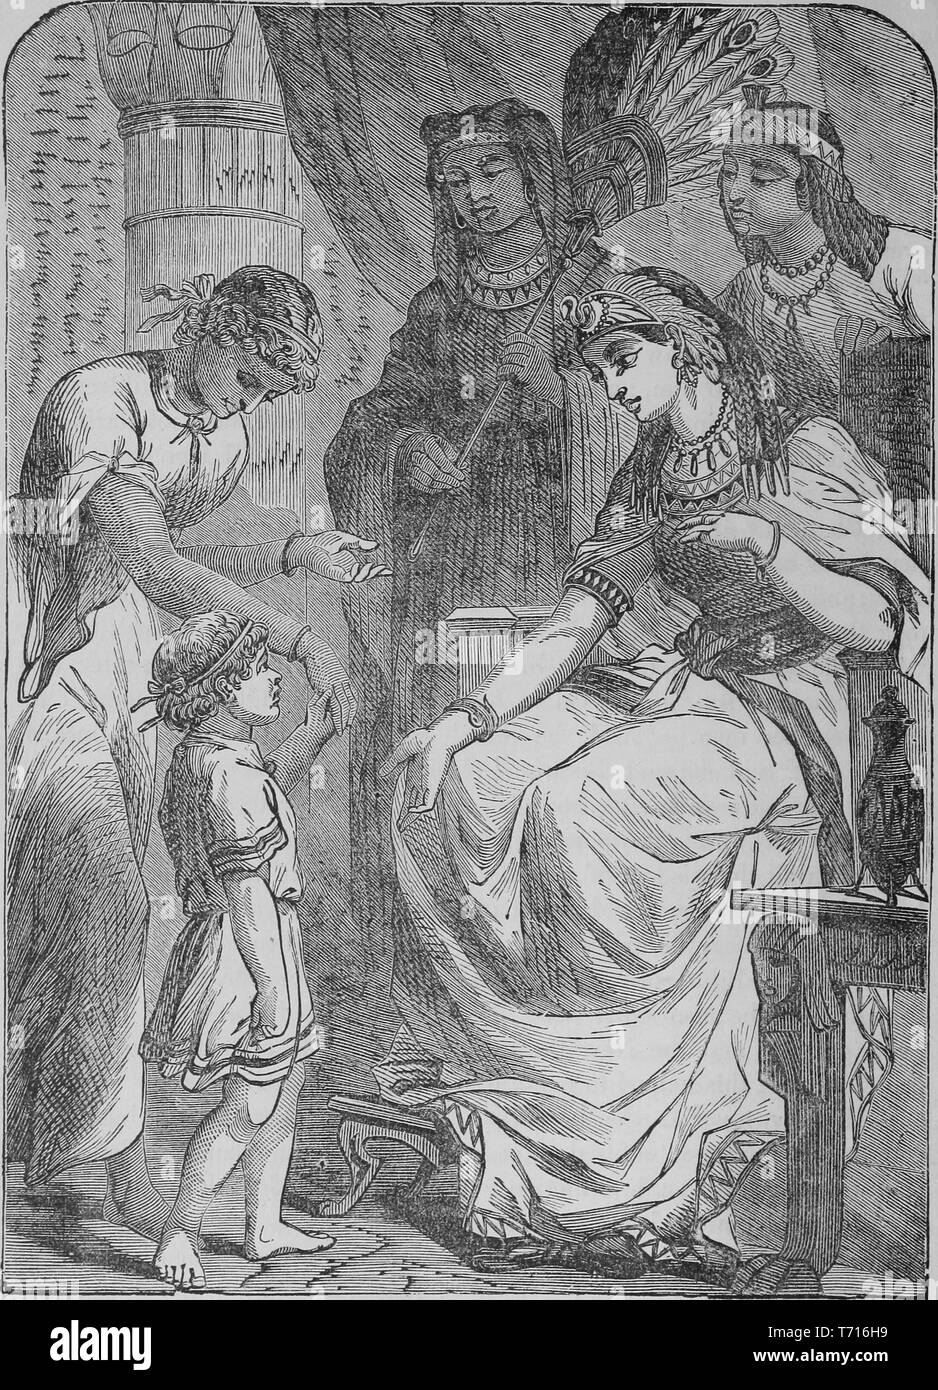 Engraving of Moses brought to Pharaoh's daughter, from the book 'The Pictorial Bible and commentator' by Ingram Cobbin, Daniel March, Linus Pierpont Brockett, and Hesba Stretton, 1878. Courtesy Internet Archive. () Stock Photo